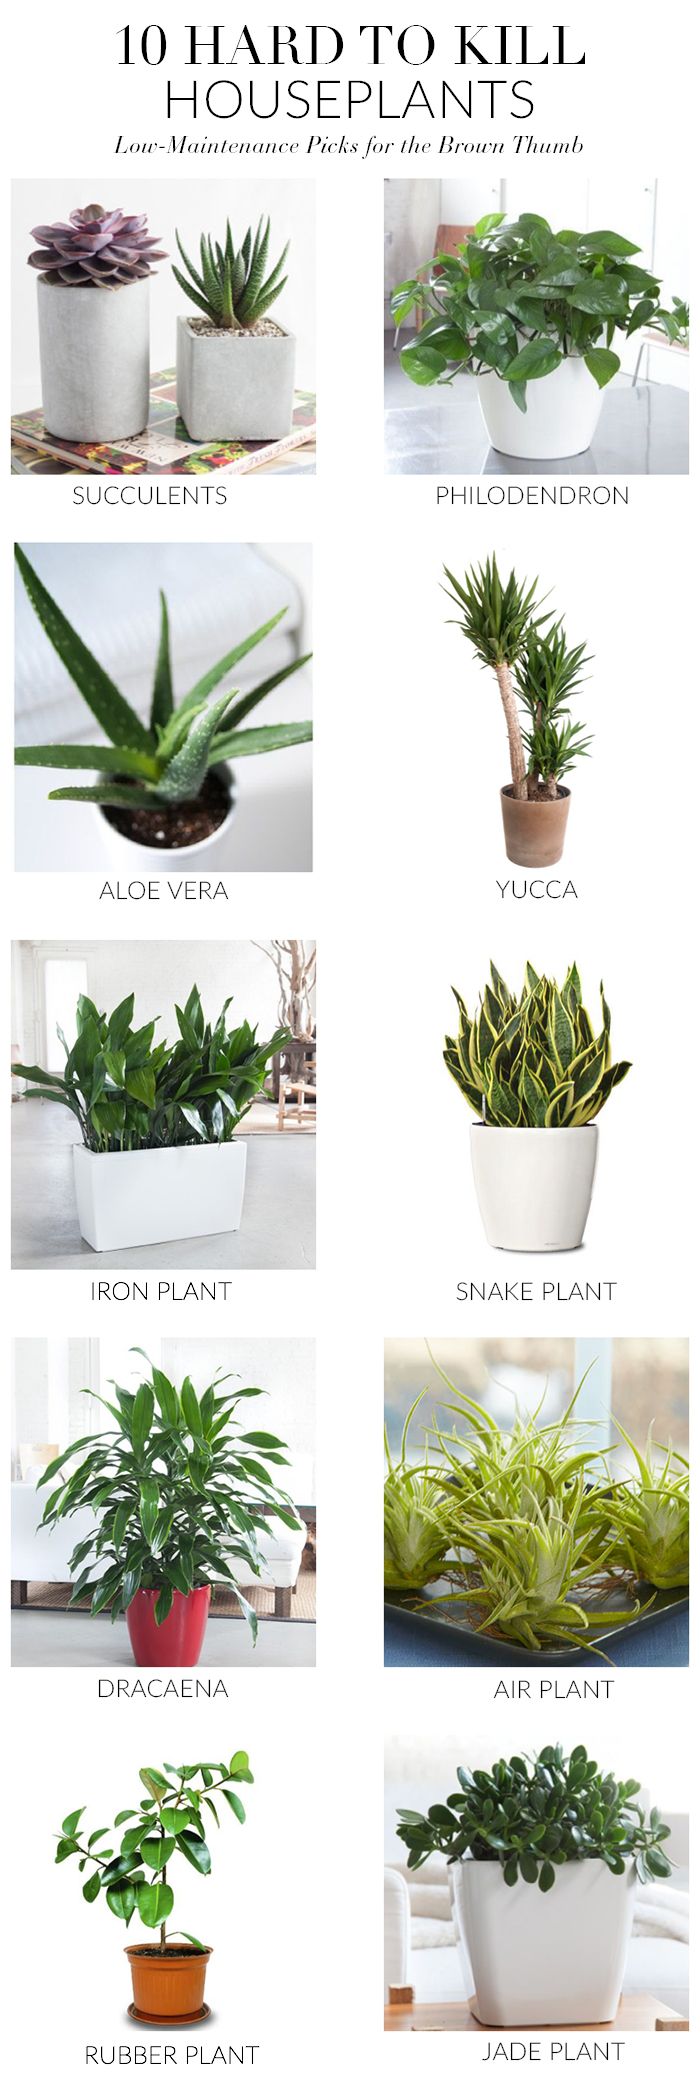 Jade plants need full sun in order to grow properly and need to be drained well....